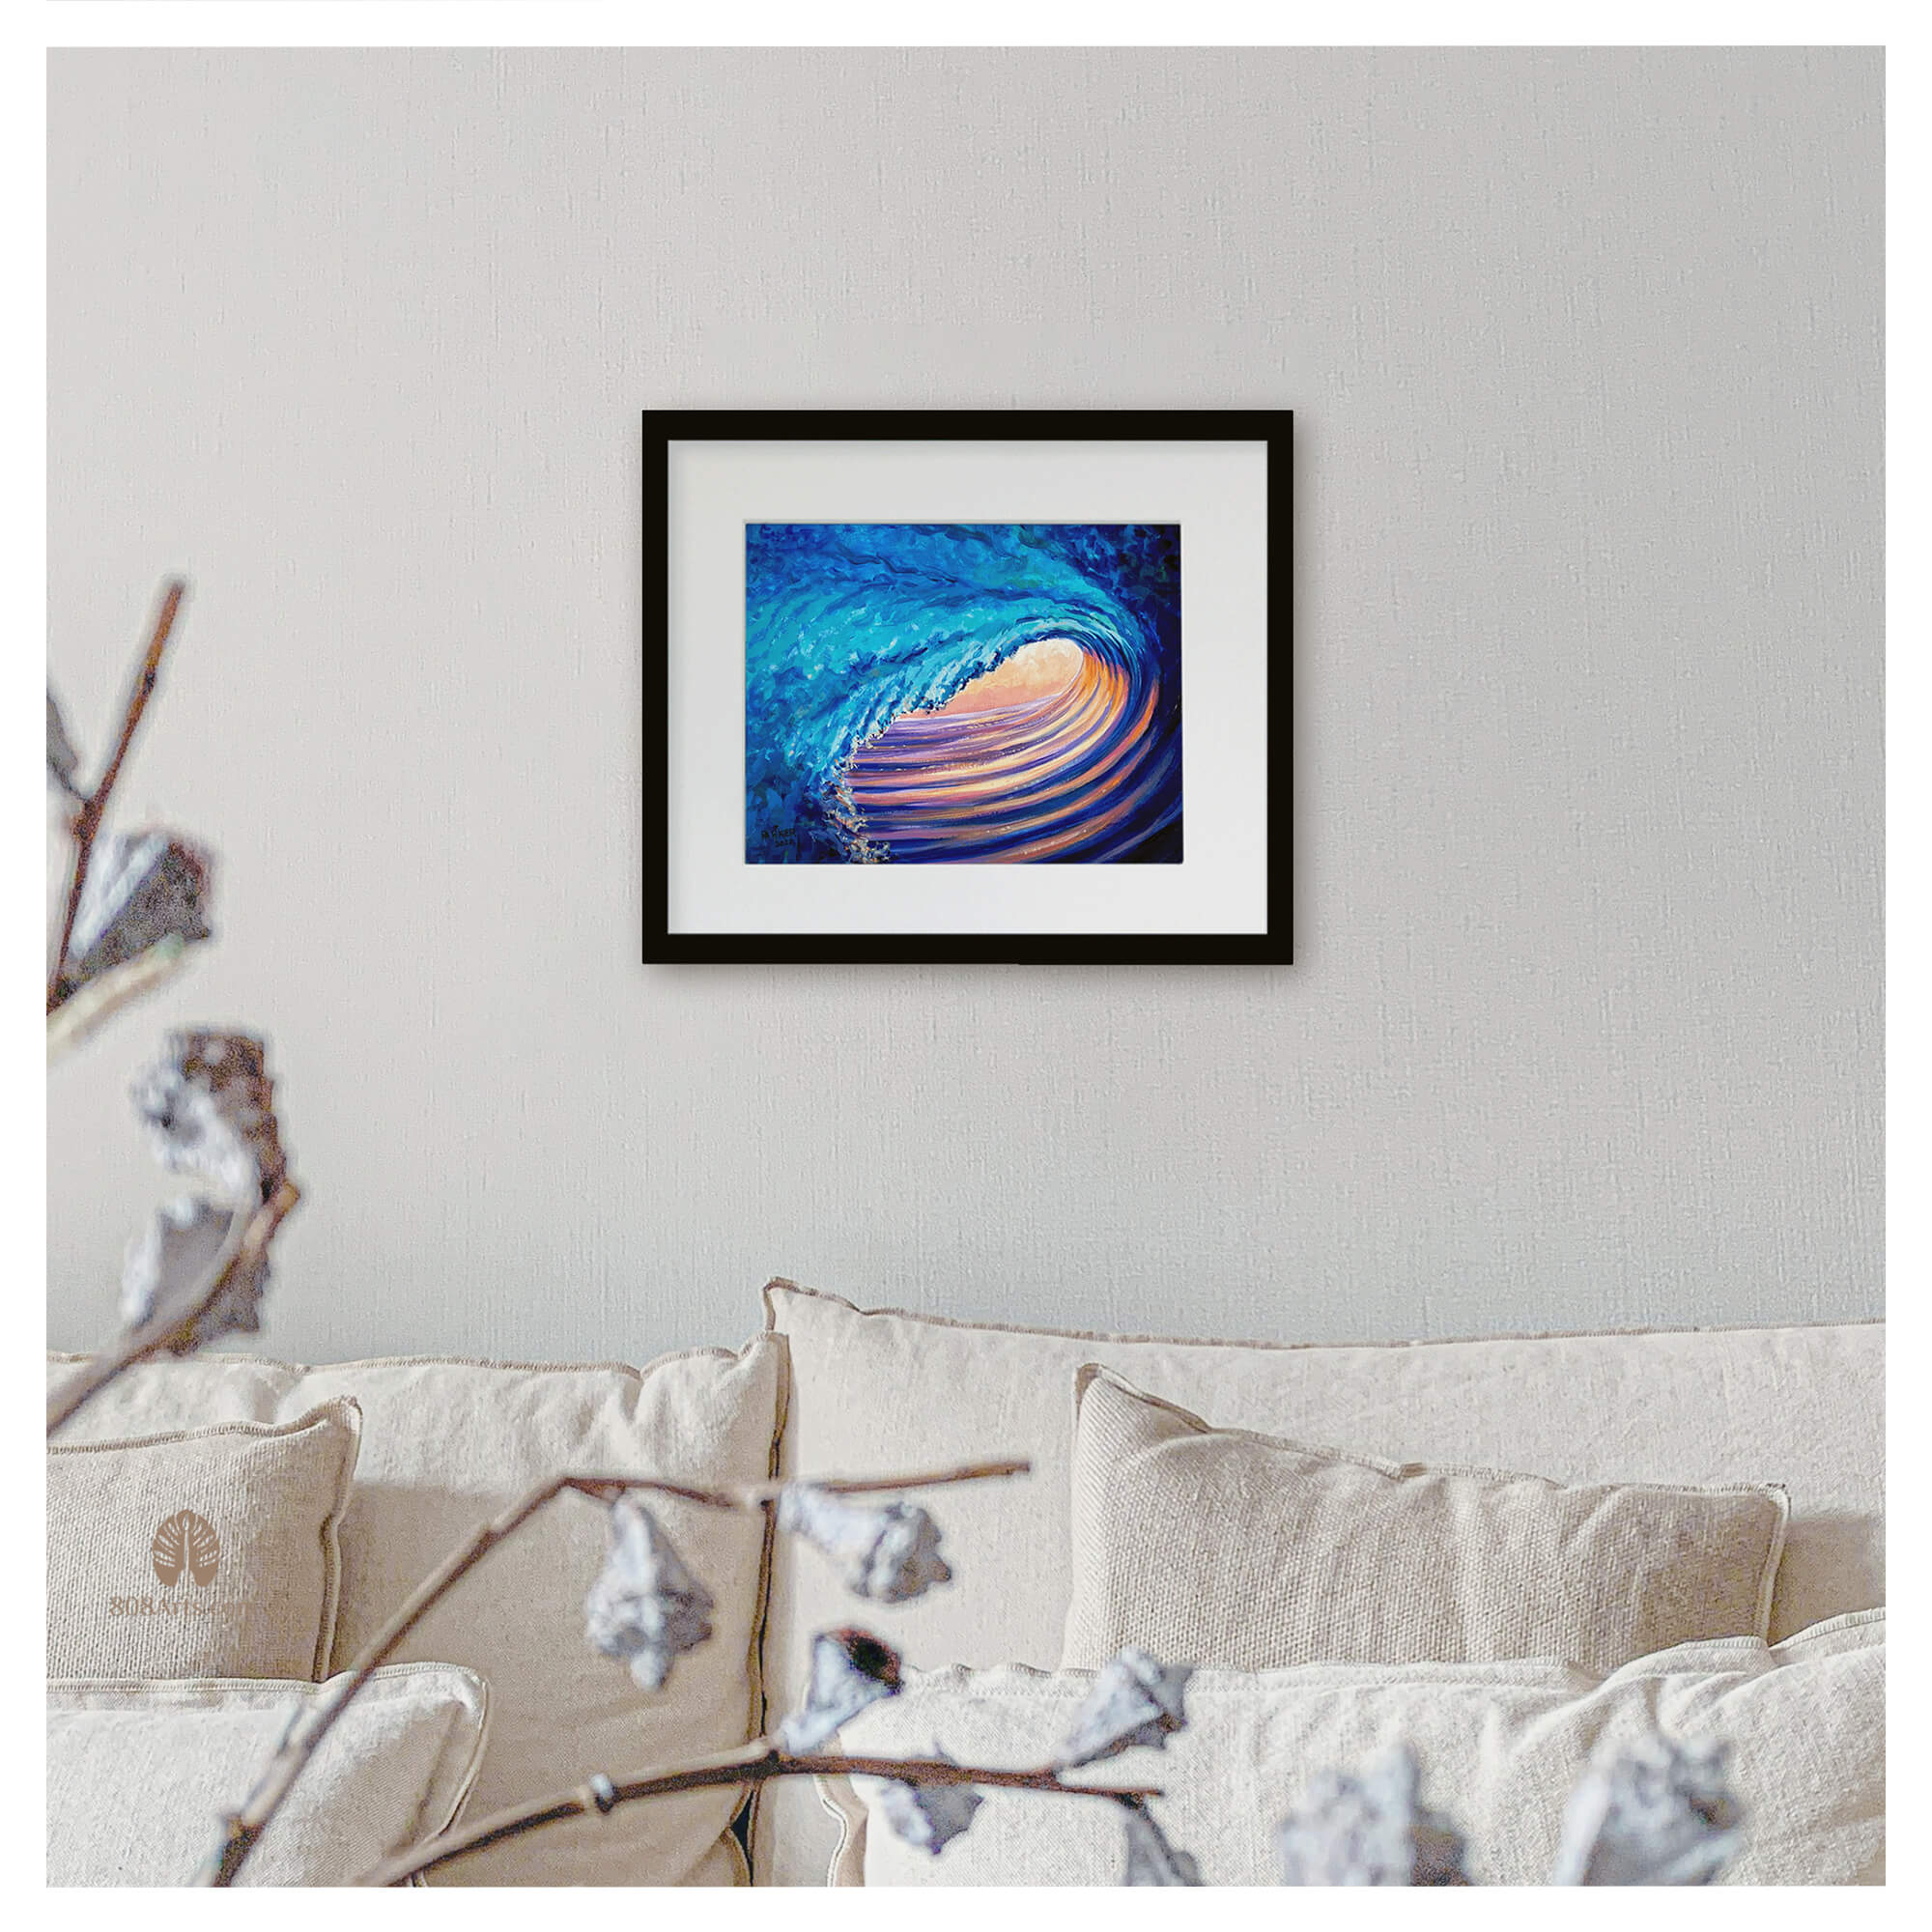 A wall artwork of an original painting in mat featuring a large crashing blue barrel wave with purple and orange hue by Maui artist Patrick Parker